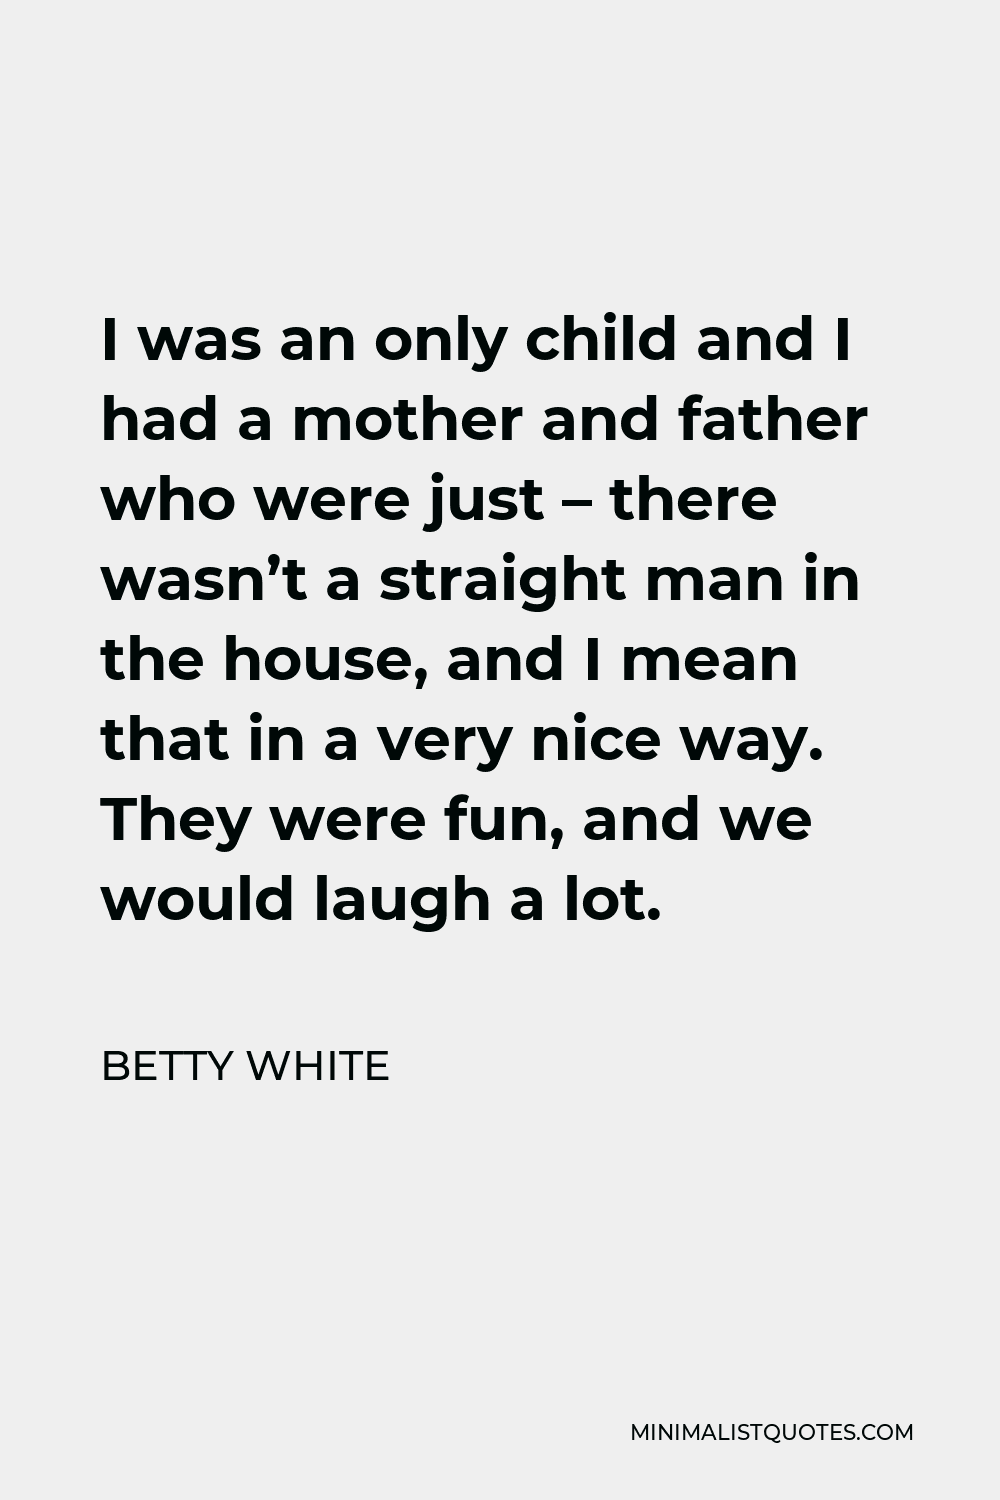 Betty White Quote - I was an only child and I had a mother and father who were just – there wasn’t a straight man in the house, and I mean that in a very nice way. They were fun, and we would laugh a lot.